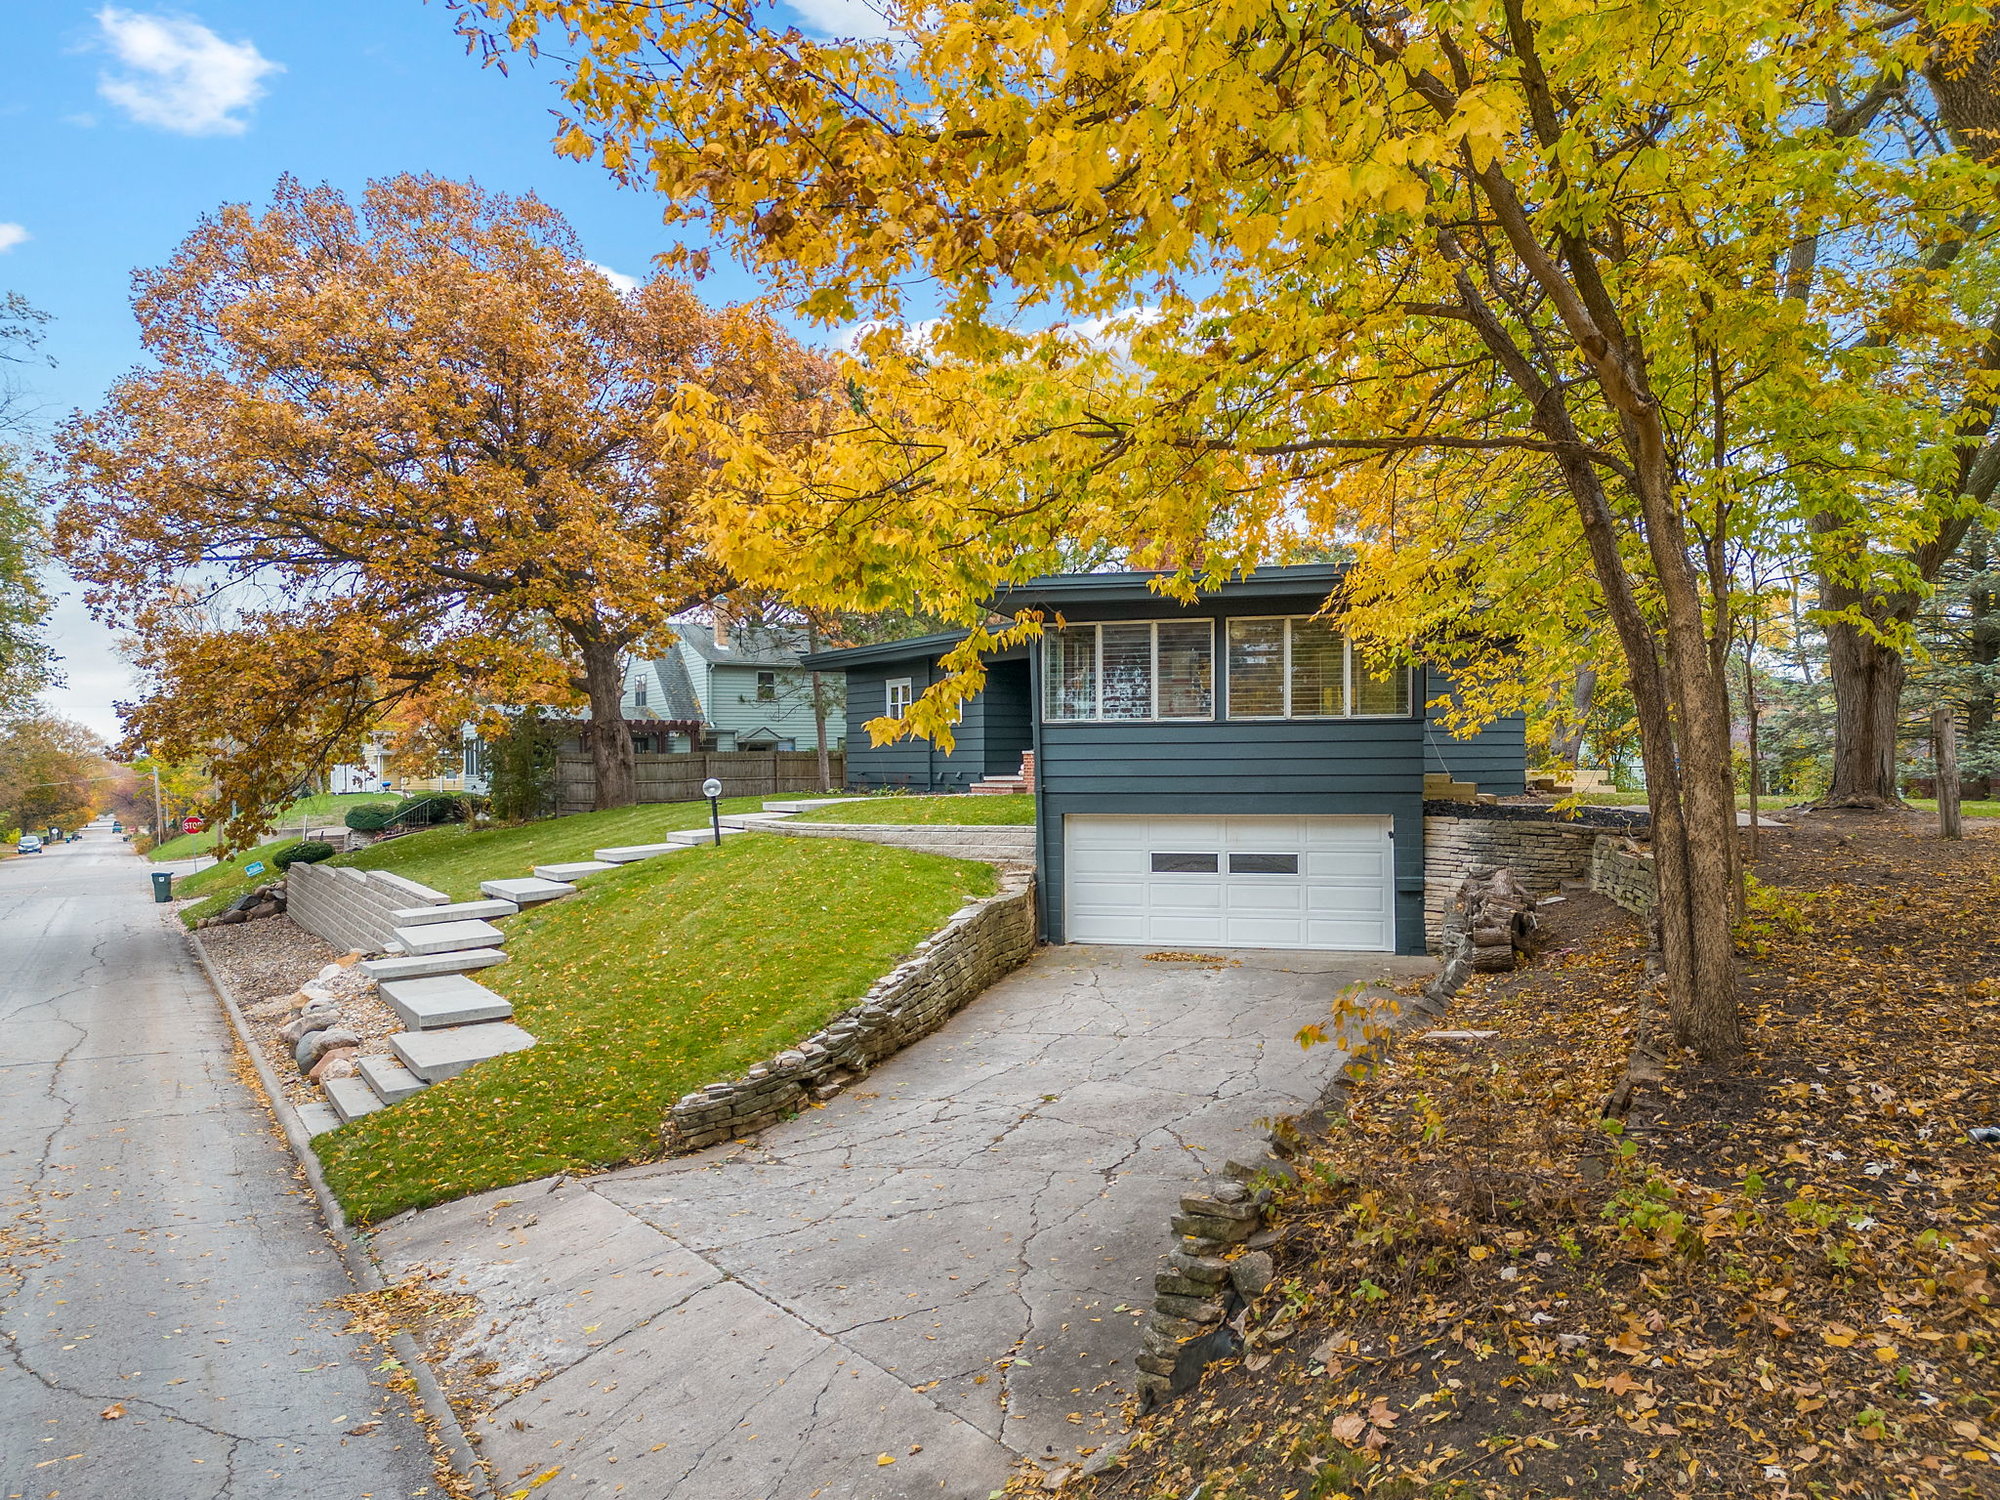 This Stunning Mid-Century Modern Home is the Perfect Blend of Retro Style and Modern Conveniences - 912 W 16th St., Cedar Falls